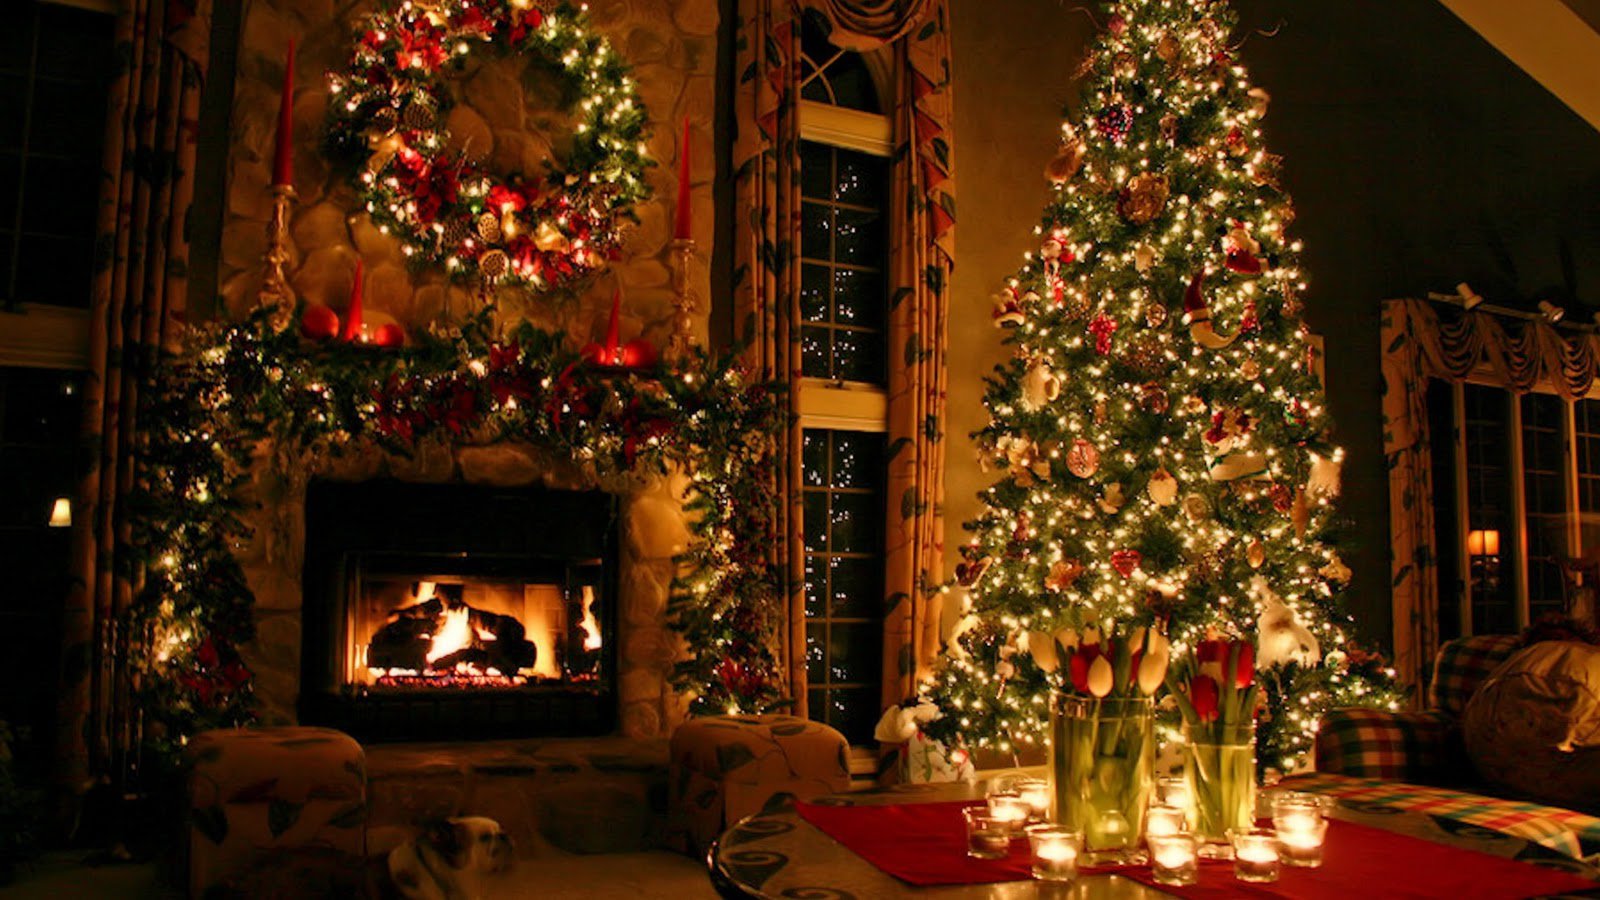 Christmas Pictures For Desktop Free Download